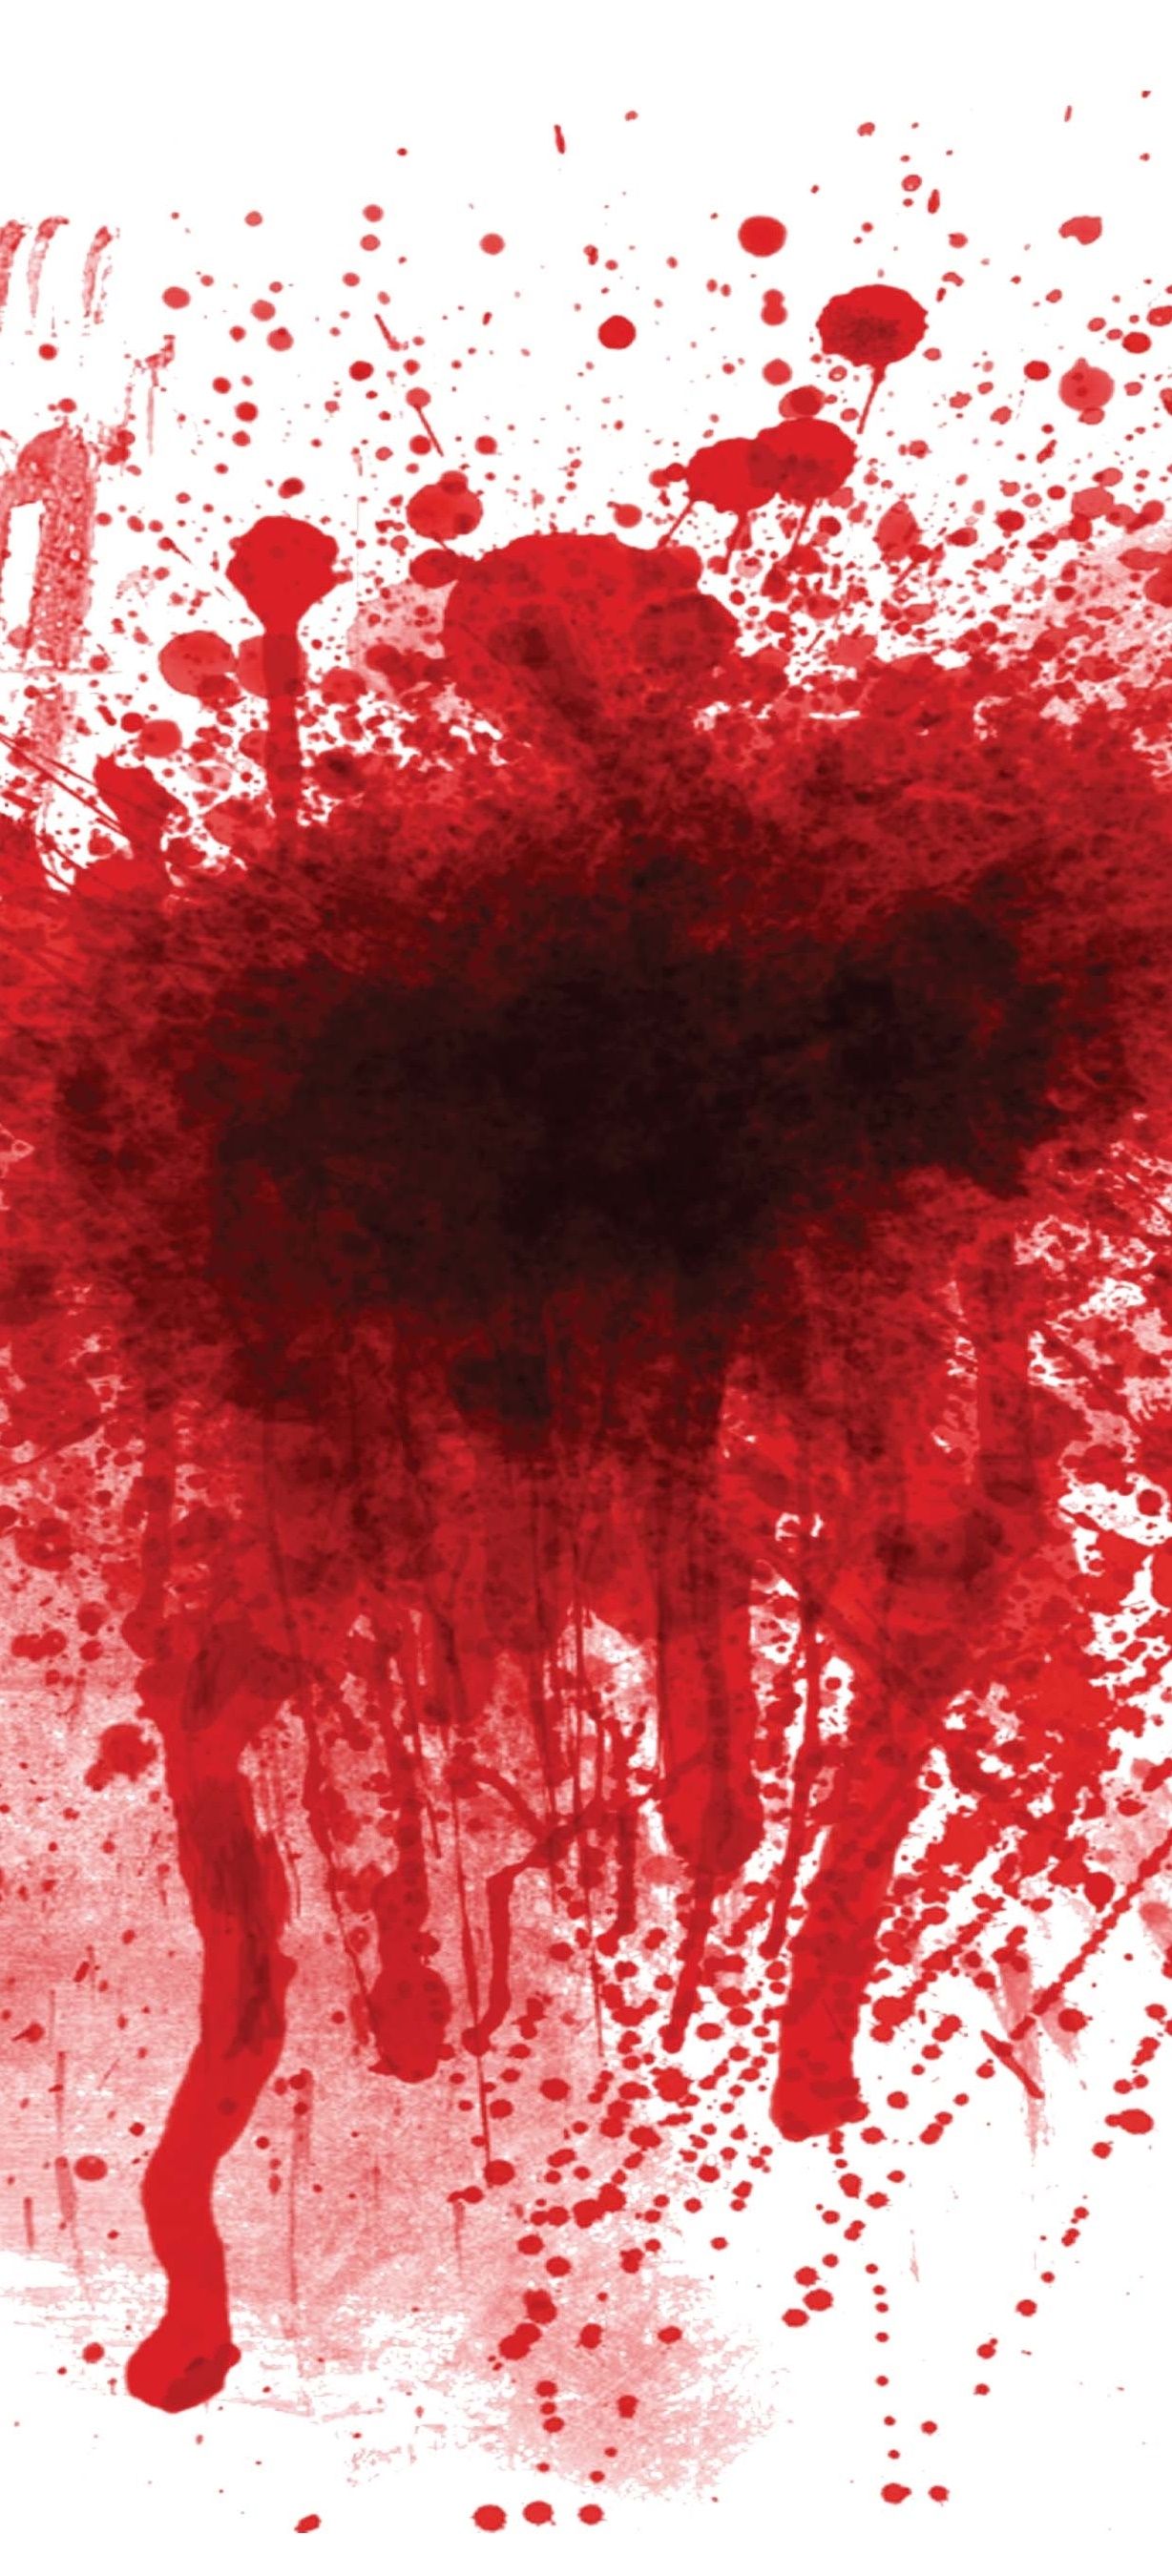 A red stain on the ground - Blood